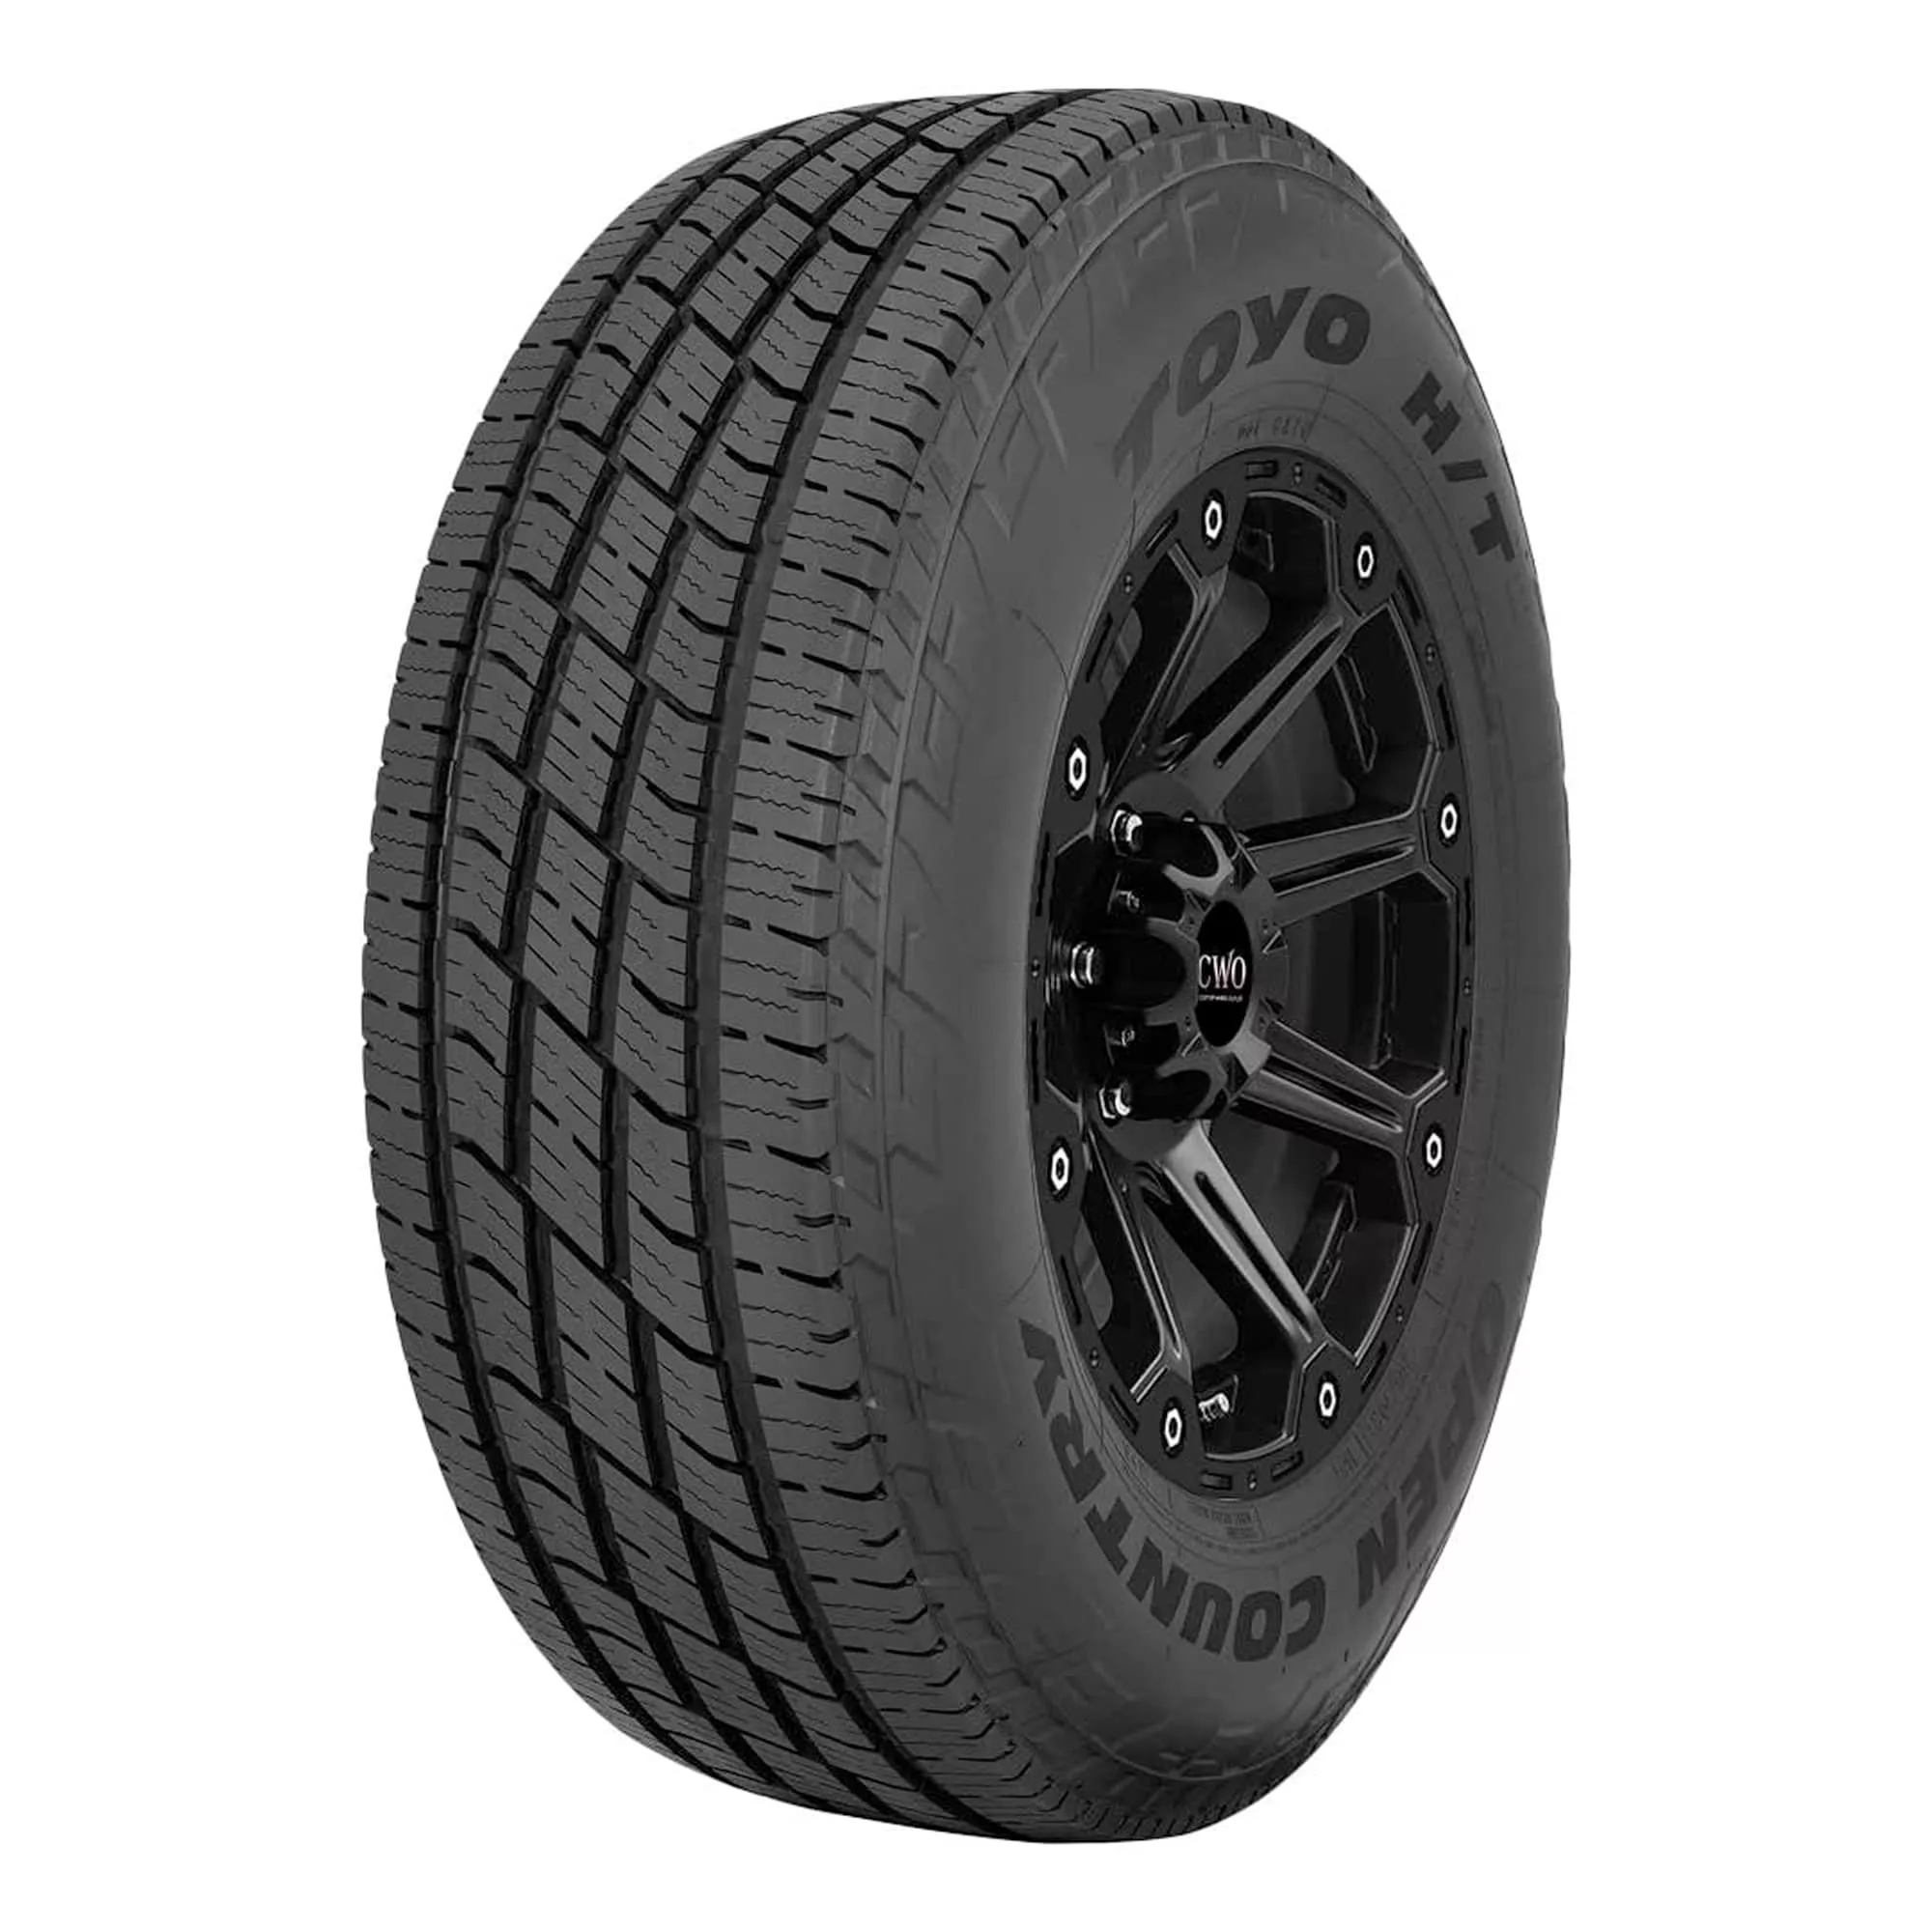 Шина 245/70R17 119/116S OPEN COUNTRY H/T OWL